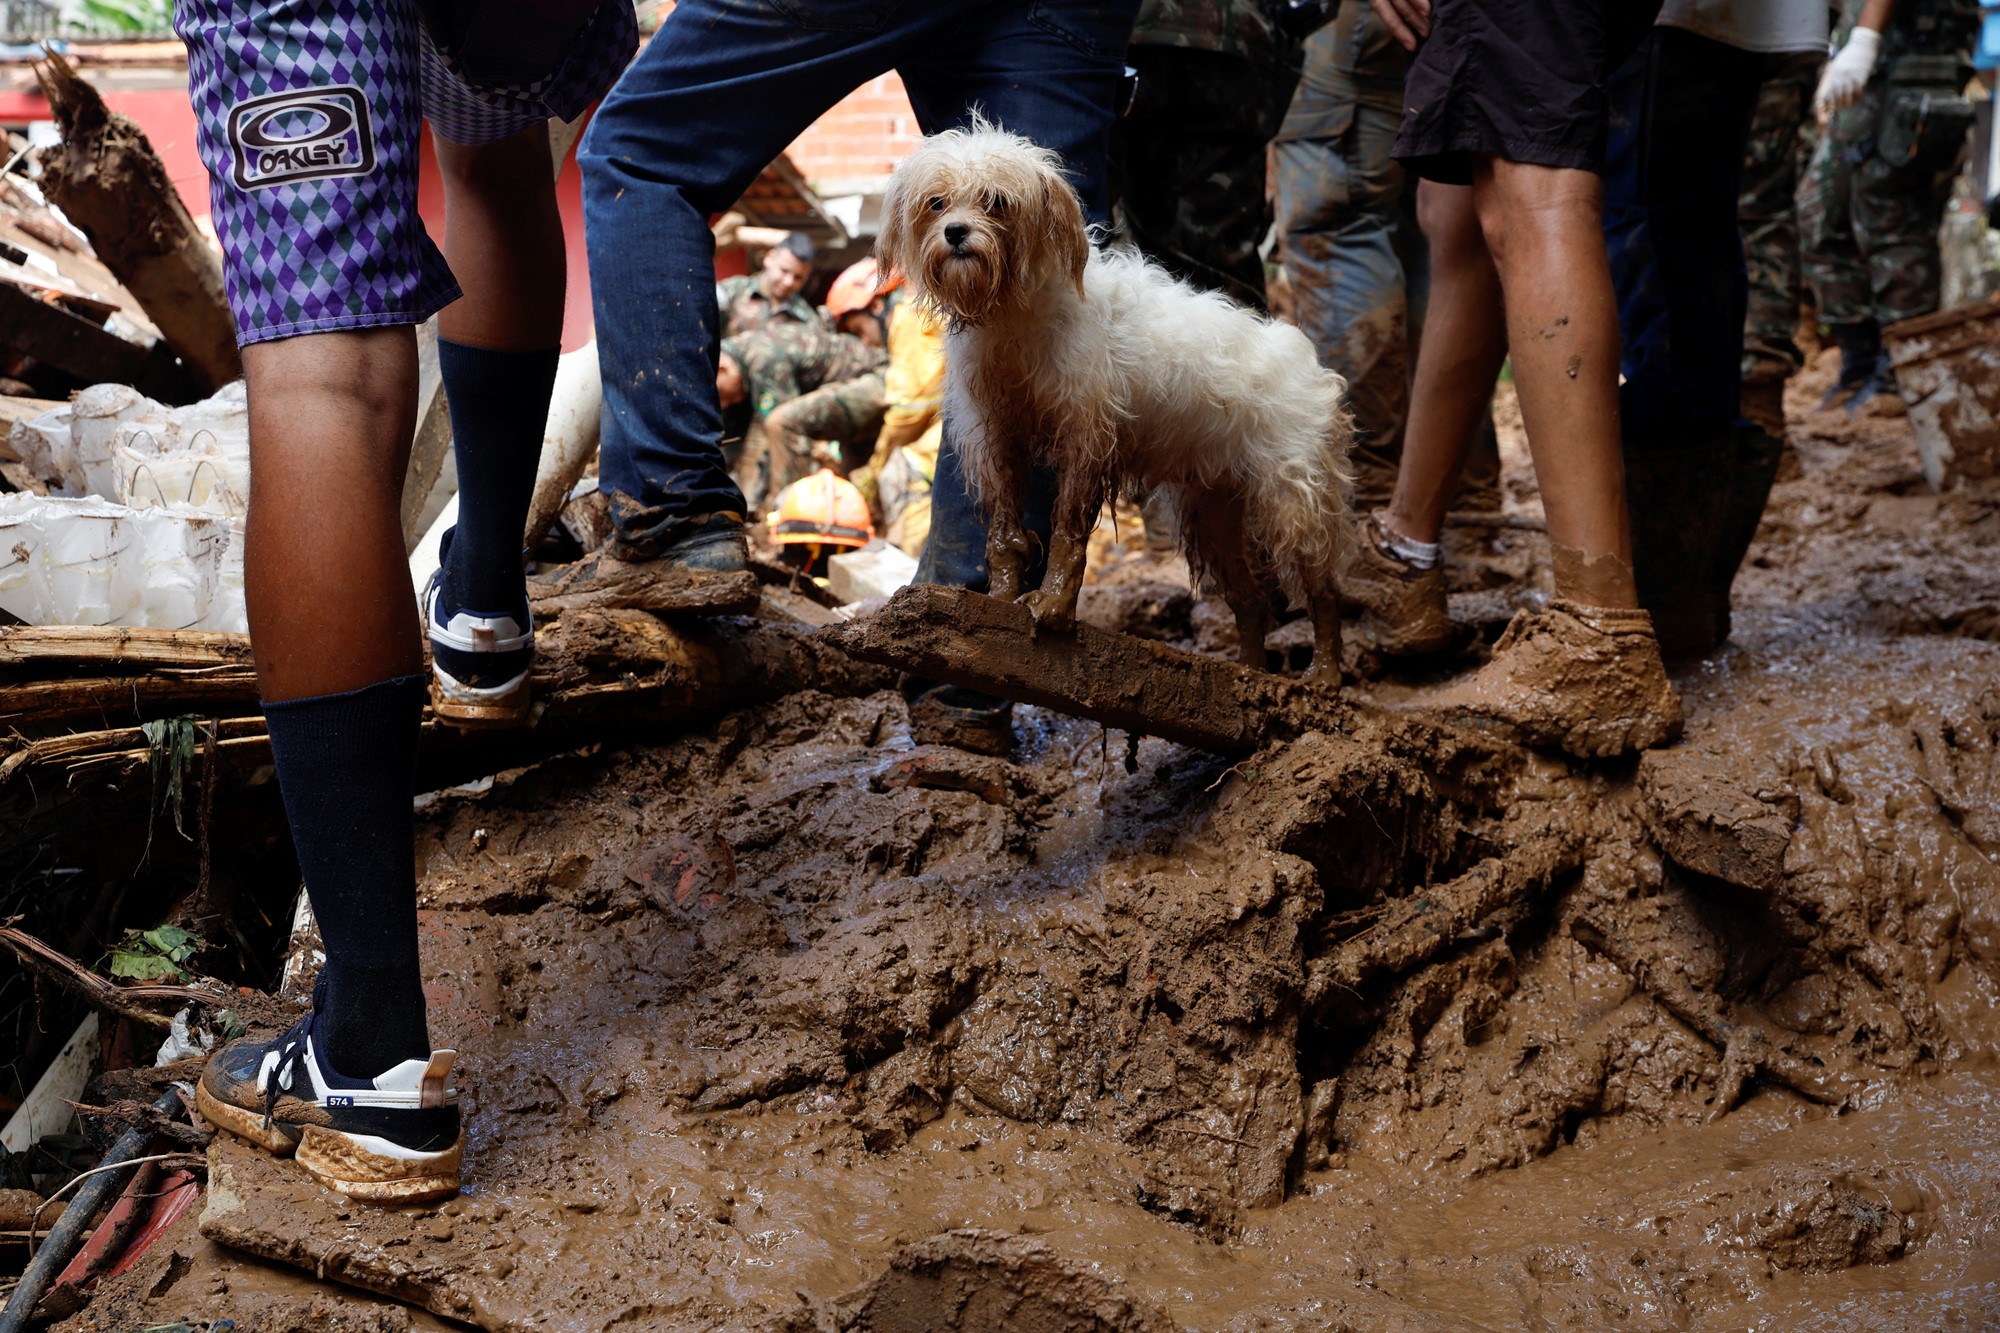 A dog stands on muddy ground between people's legs. 